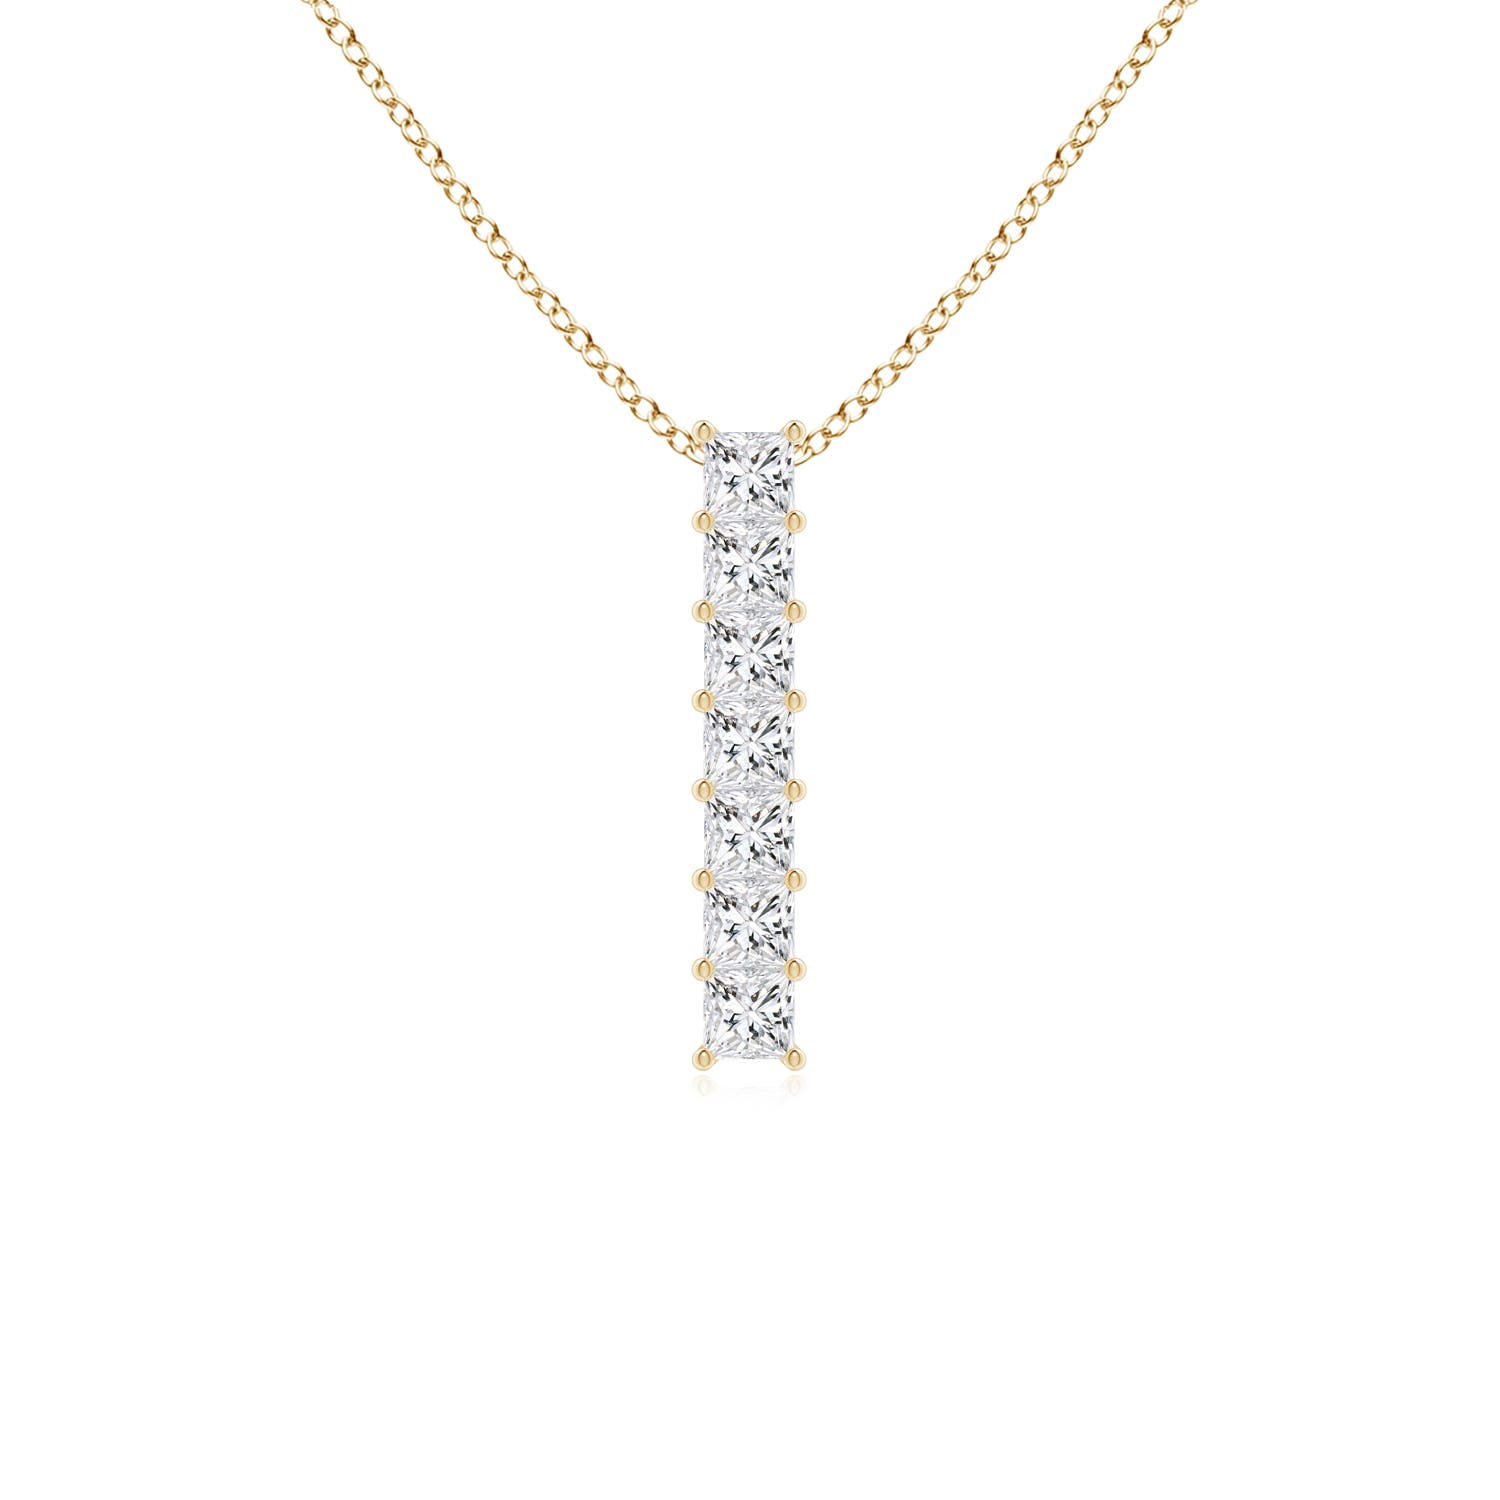 H, SI2 / 0.77 CT / 14 KT Yellow Gold